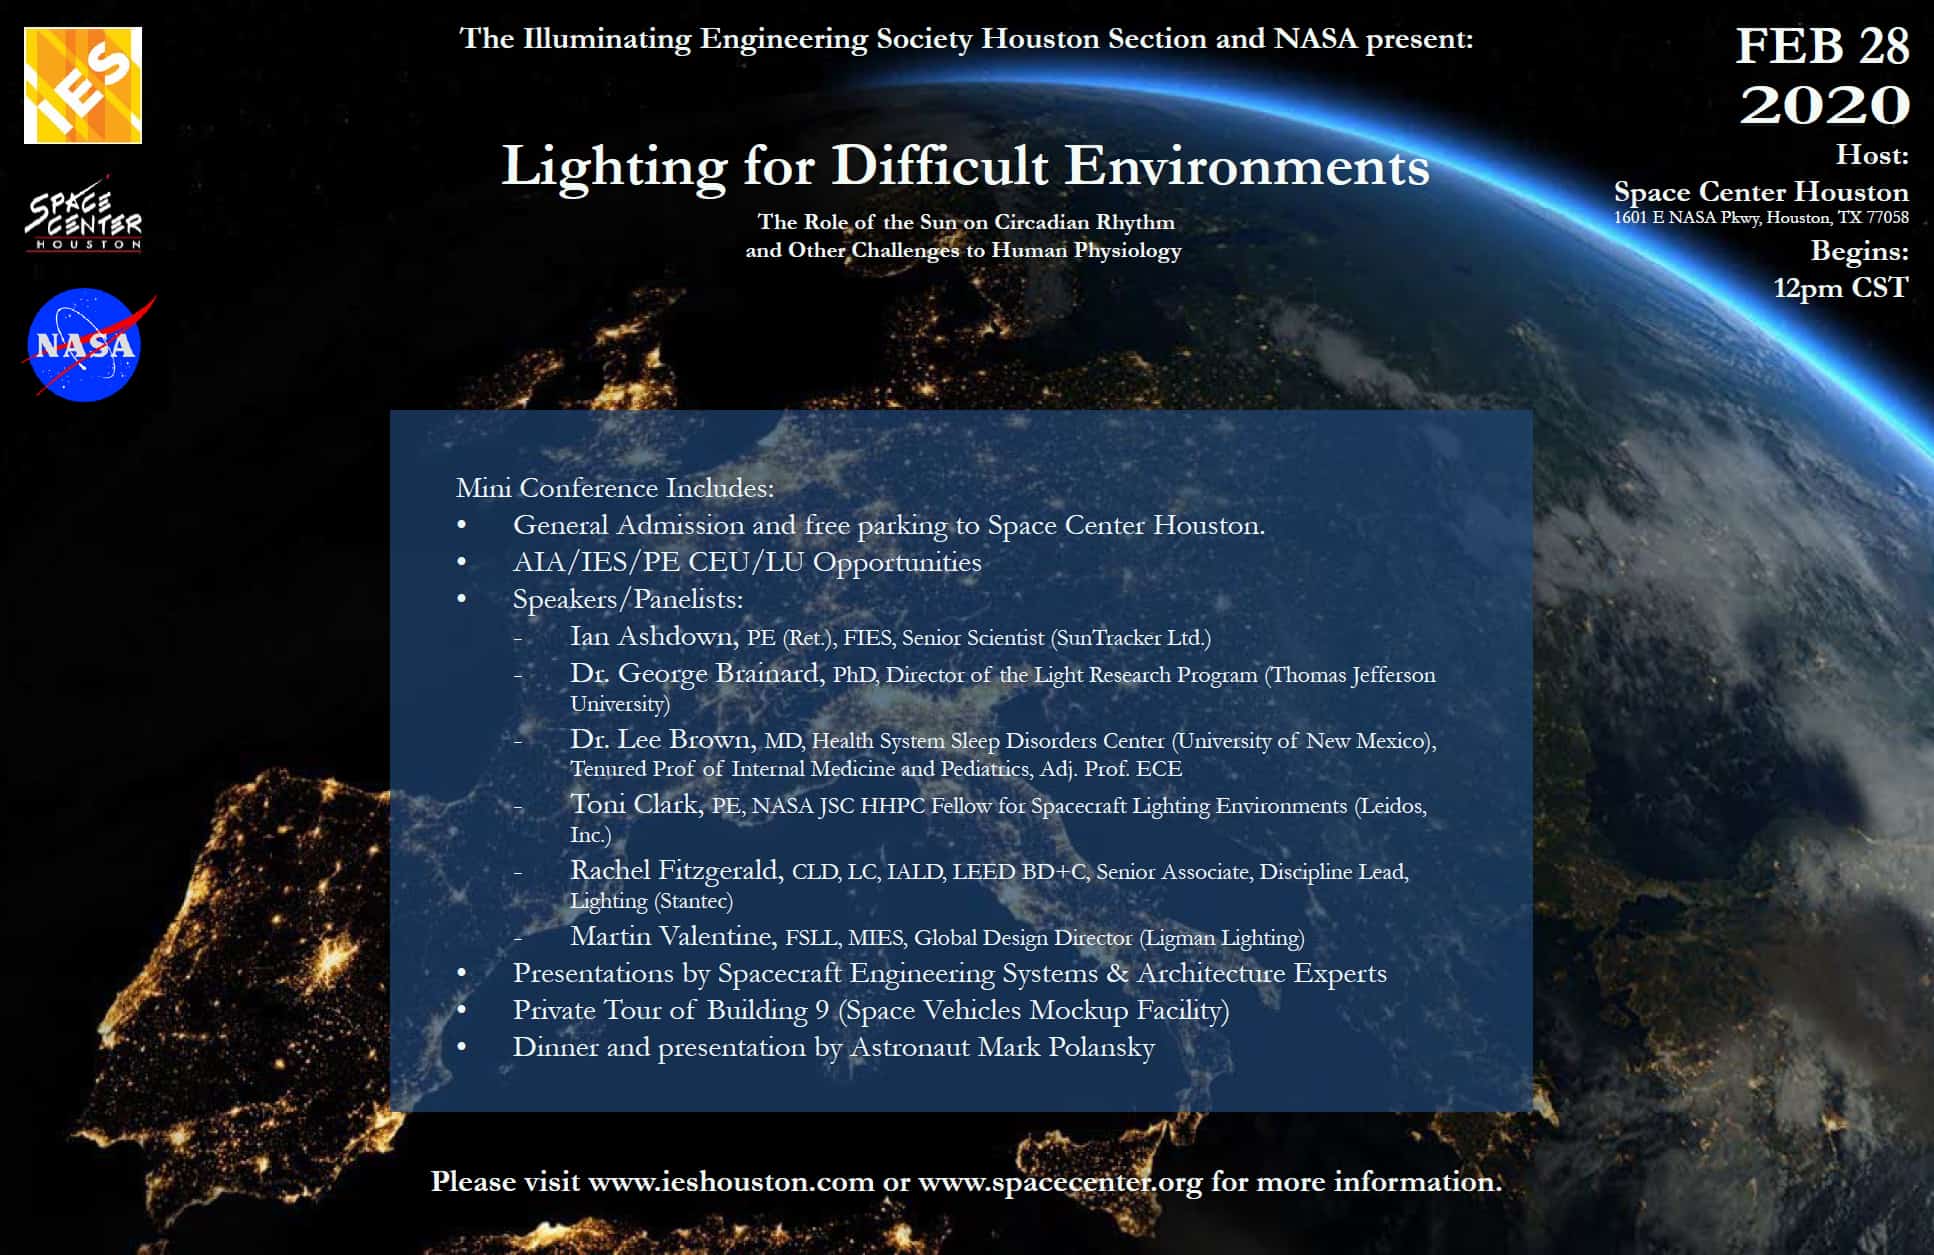 News: Lighting for Difficult Environments NASA Mini Conference